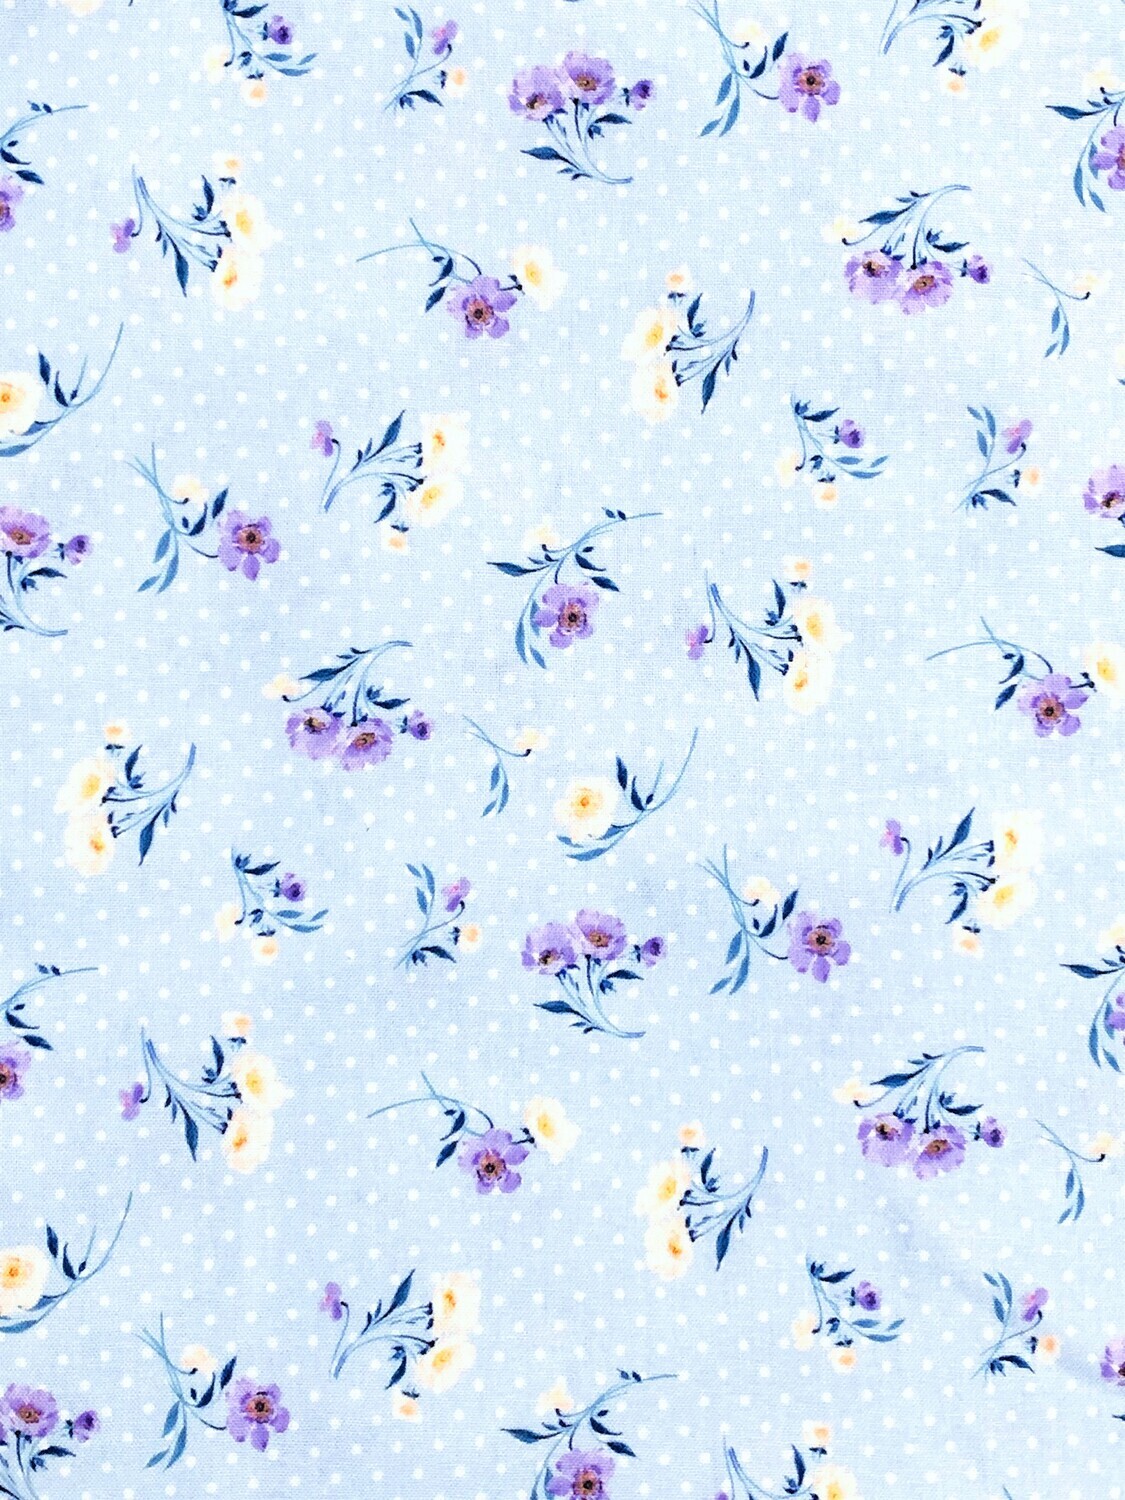 Dancing Florals on Polka | Quilting Cotton | 112cm wide